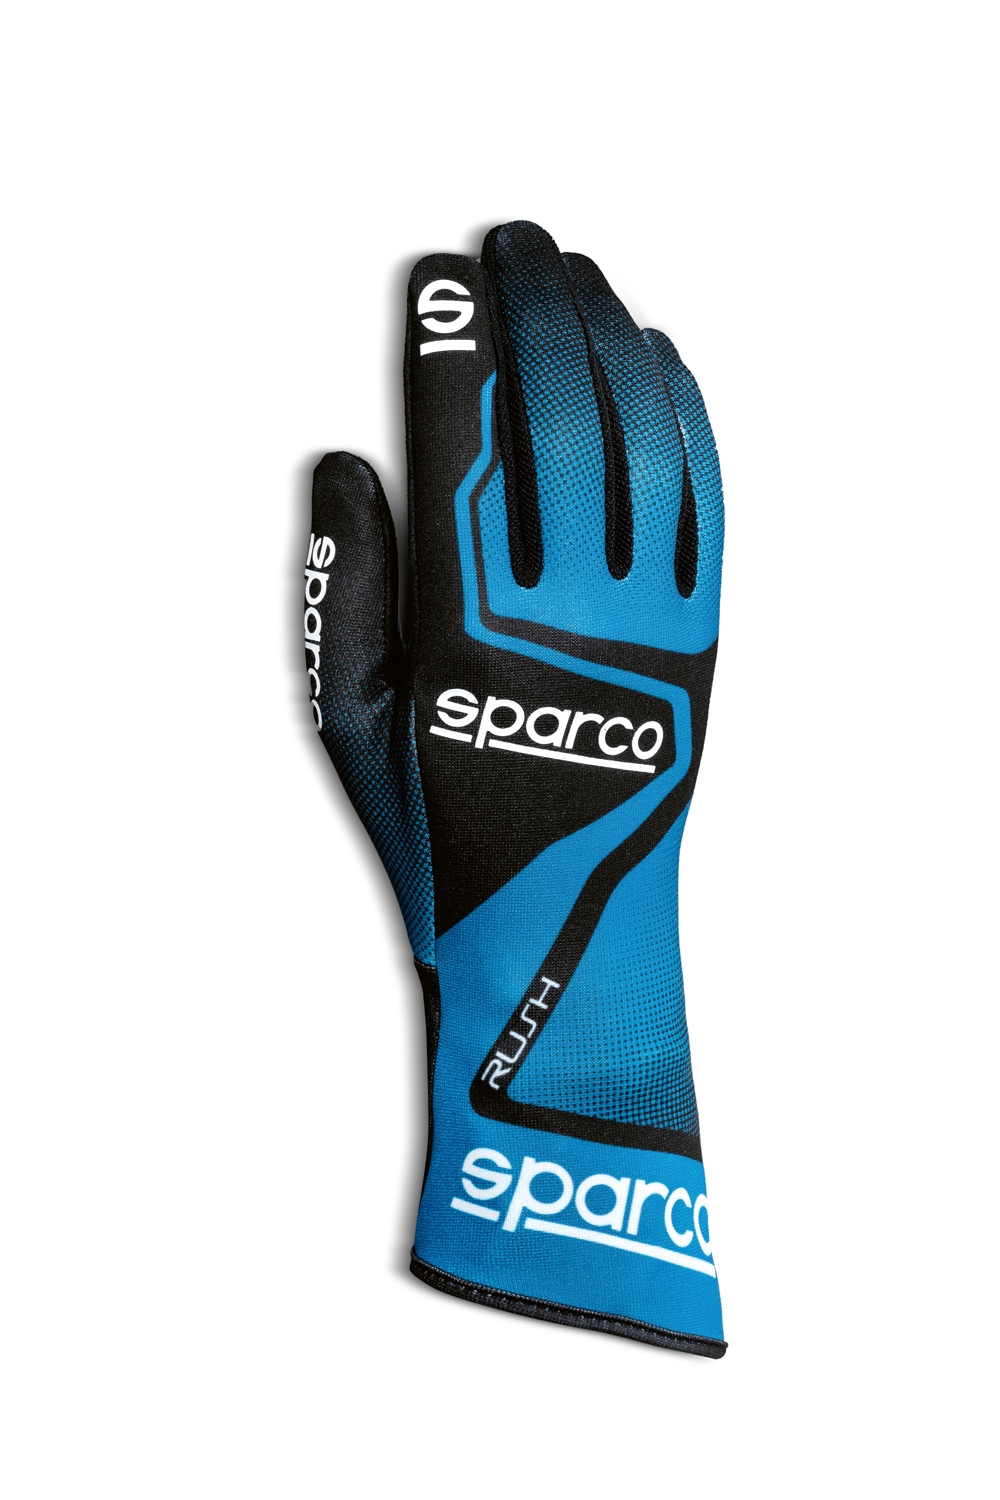 Sparco | Rush Racing Karthandschuhe Point